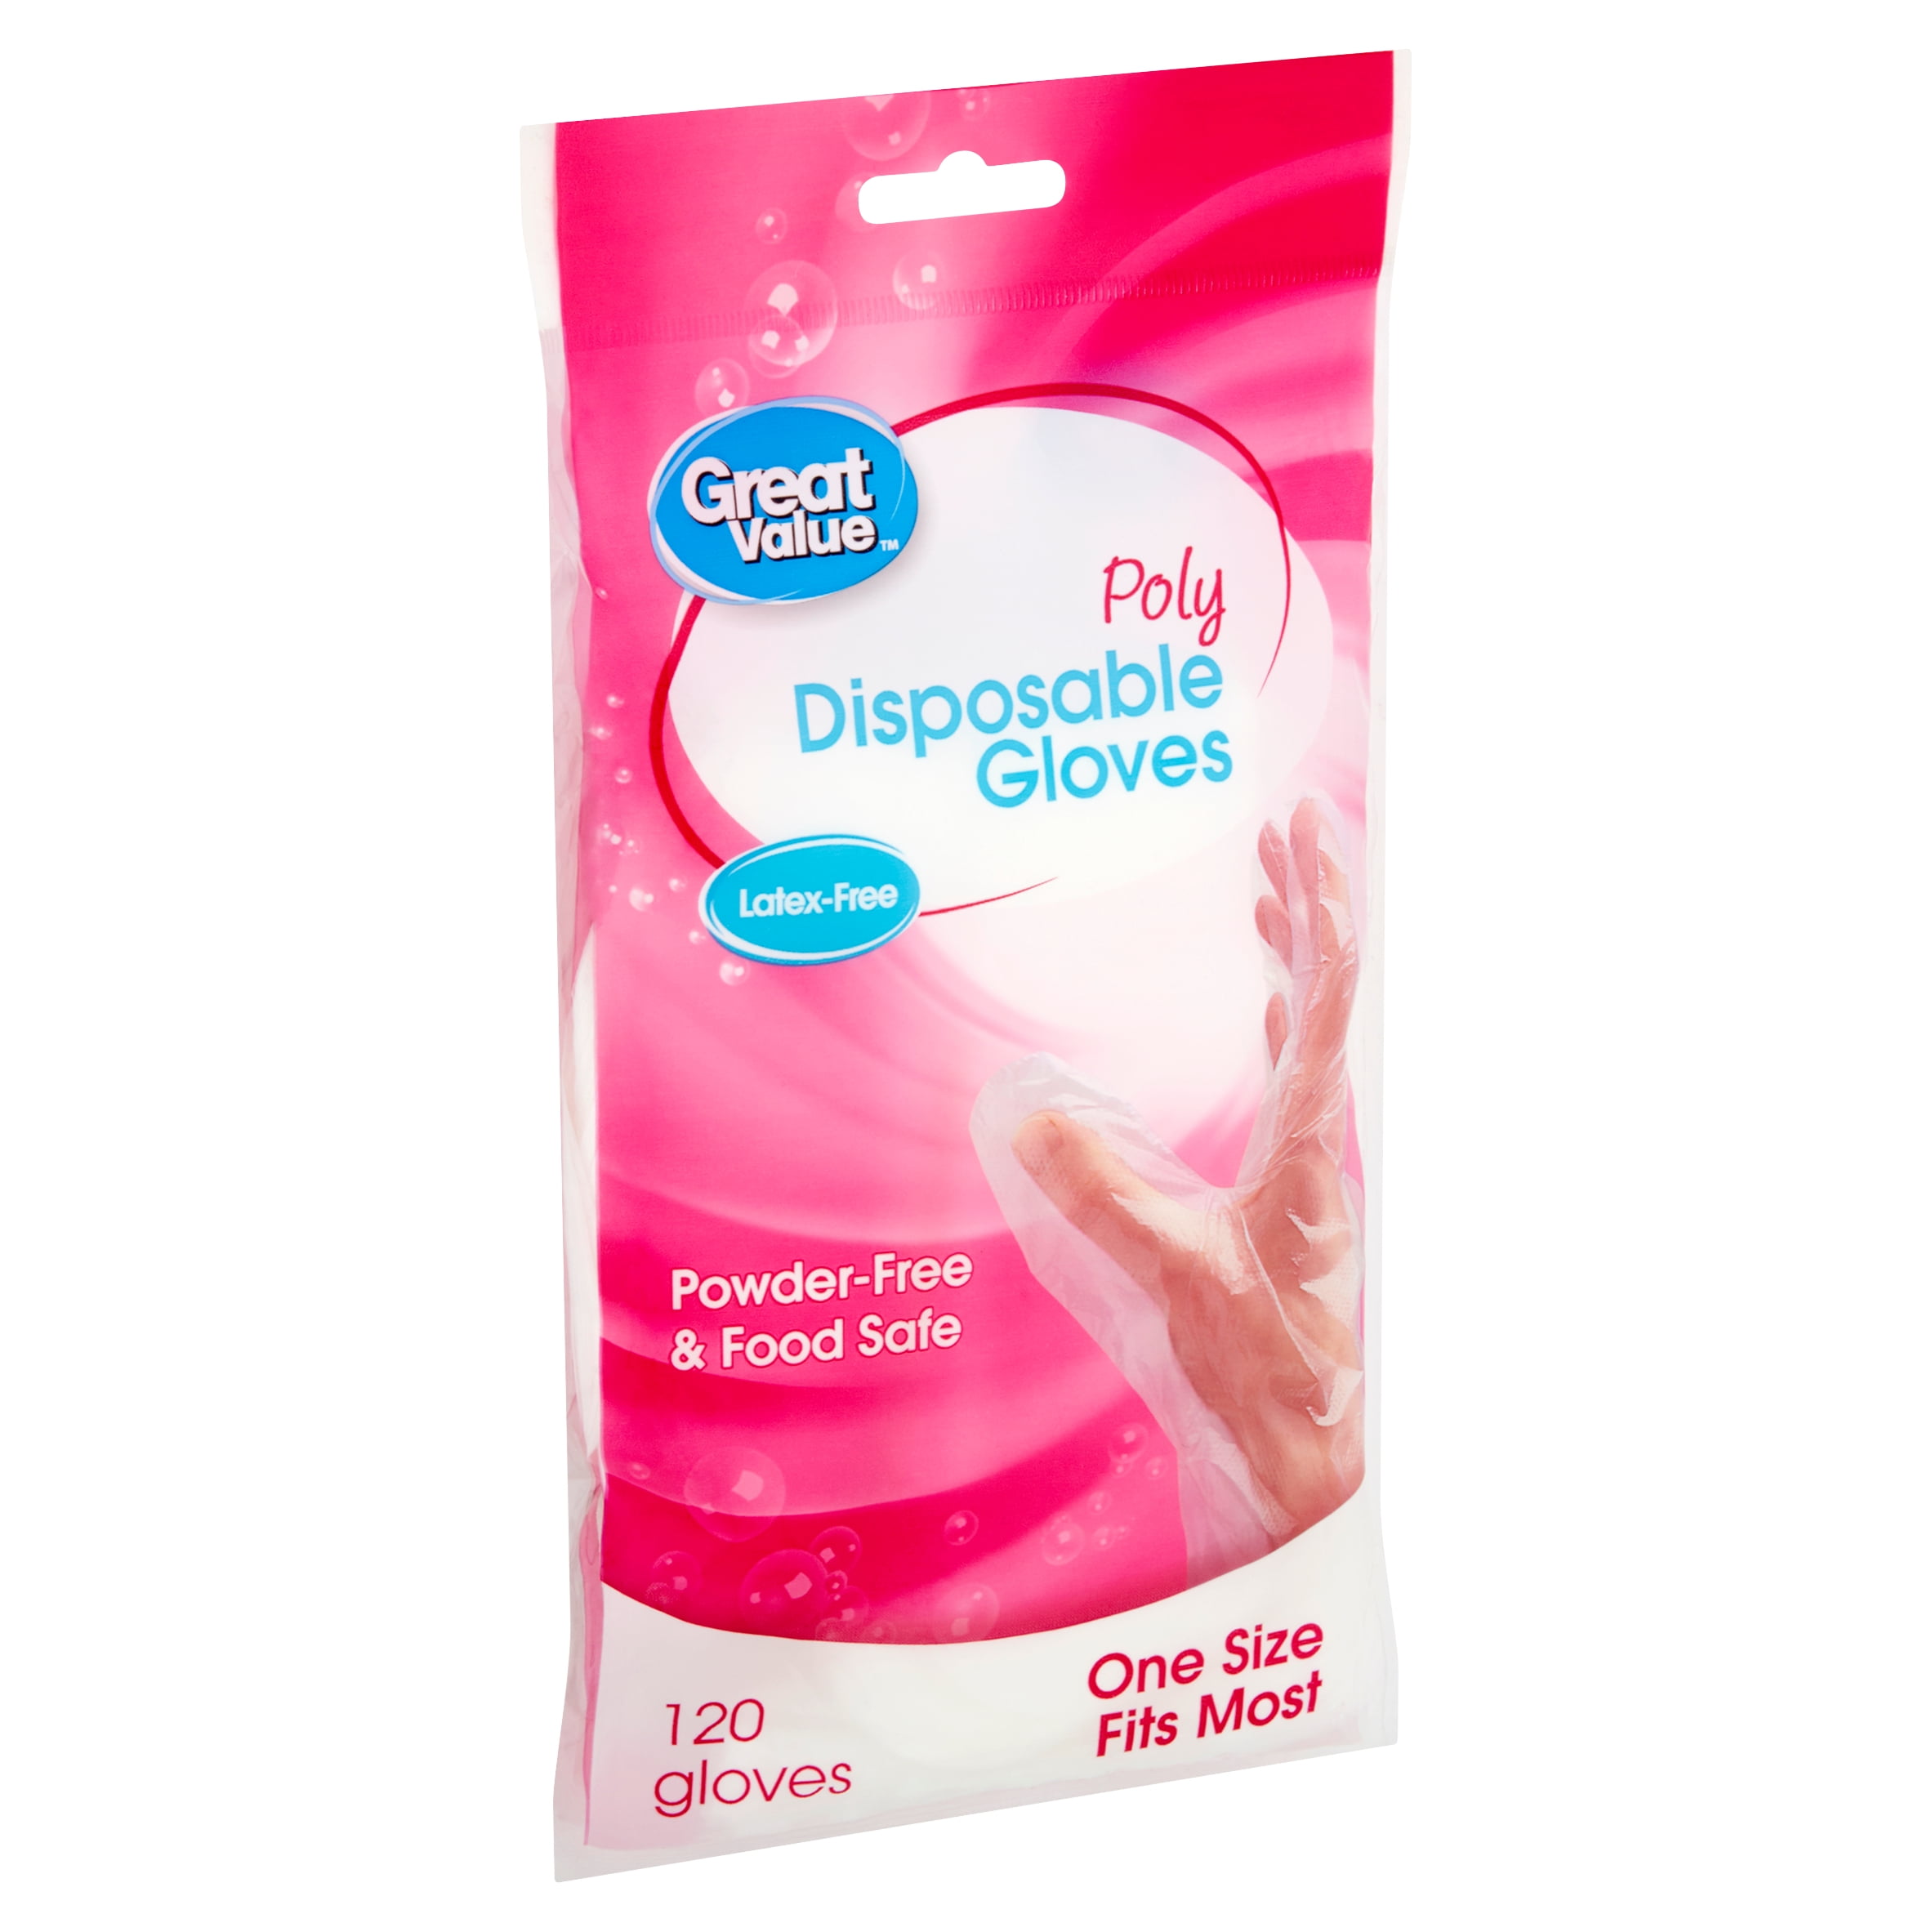 Great Value Poly Disposable Gloves, 120 count